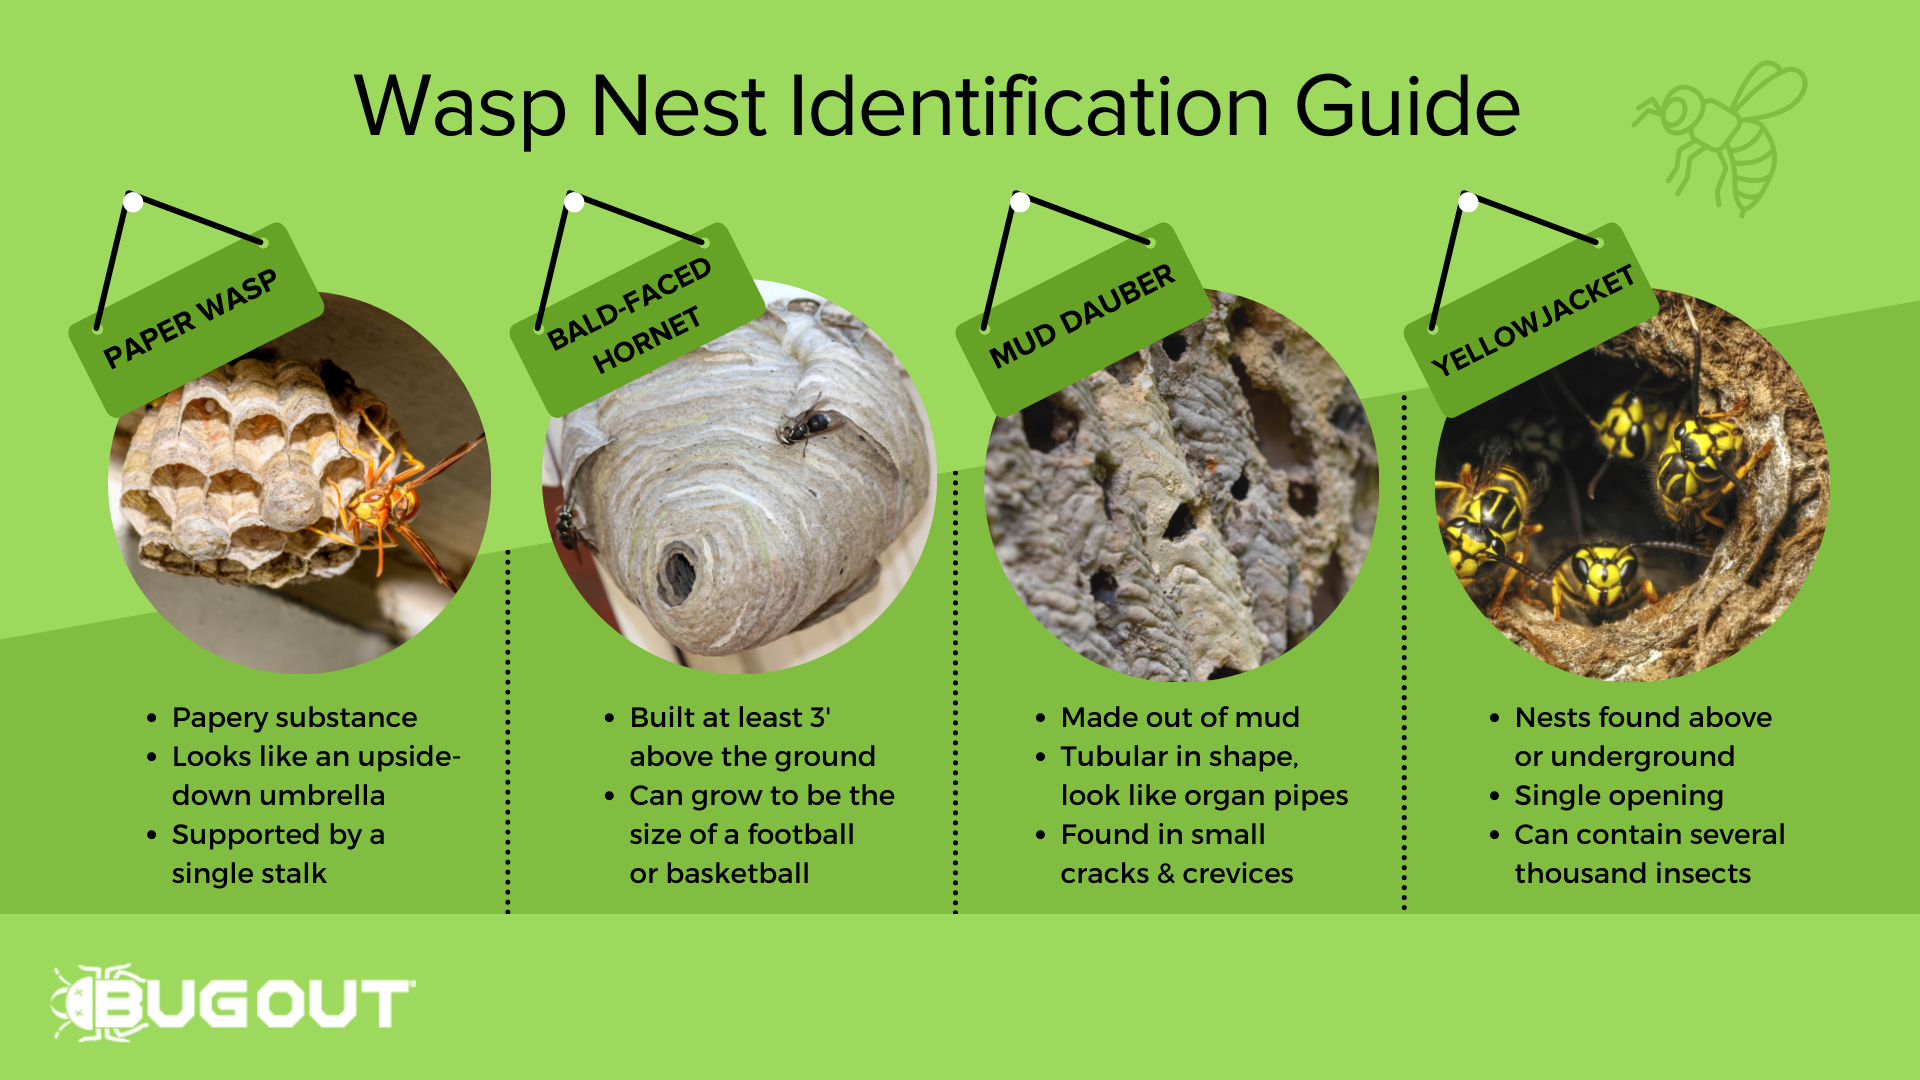 Wasp, Hornet and Bee extermination services in Lubbock, TX